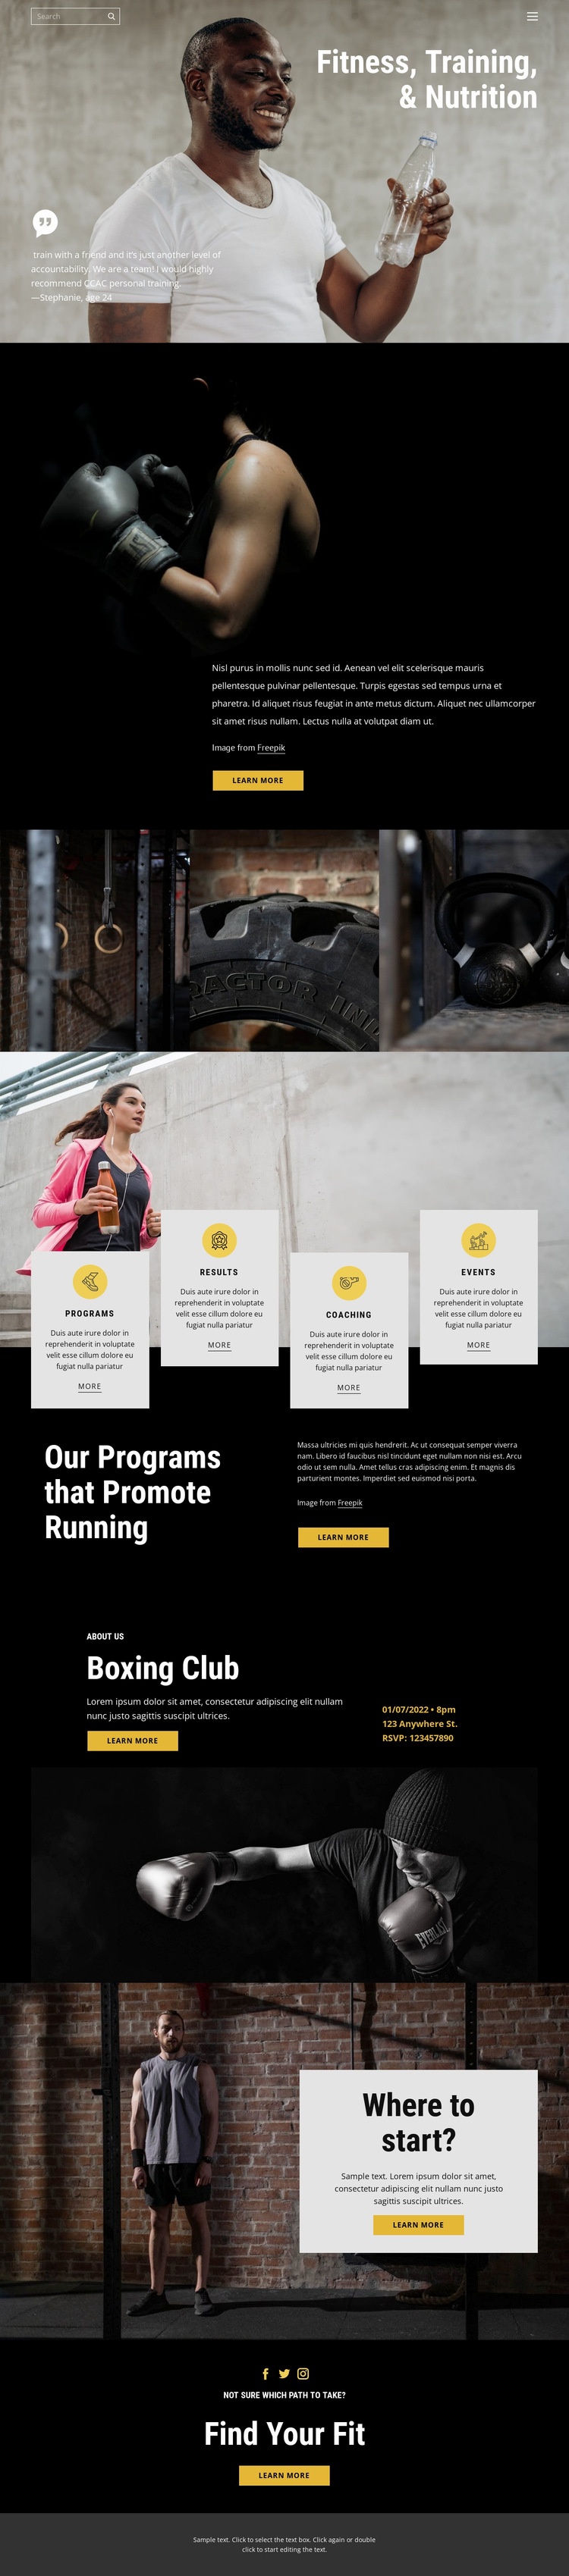 Kickboxing and crossfit Web Page Design